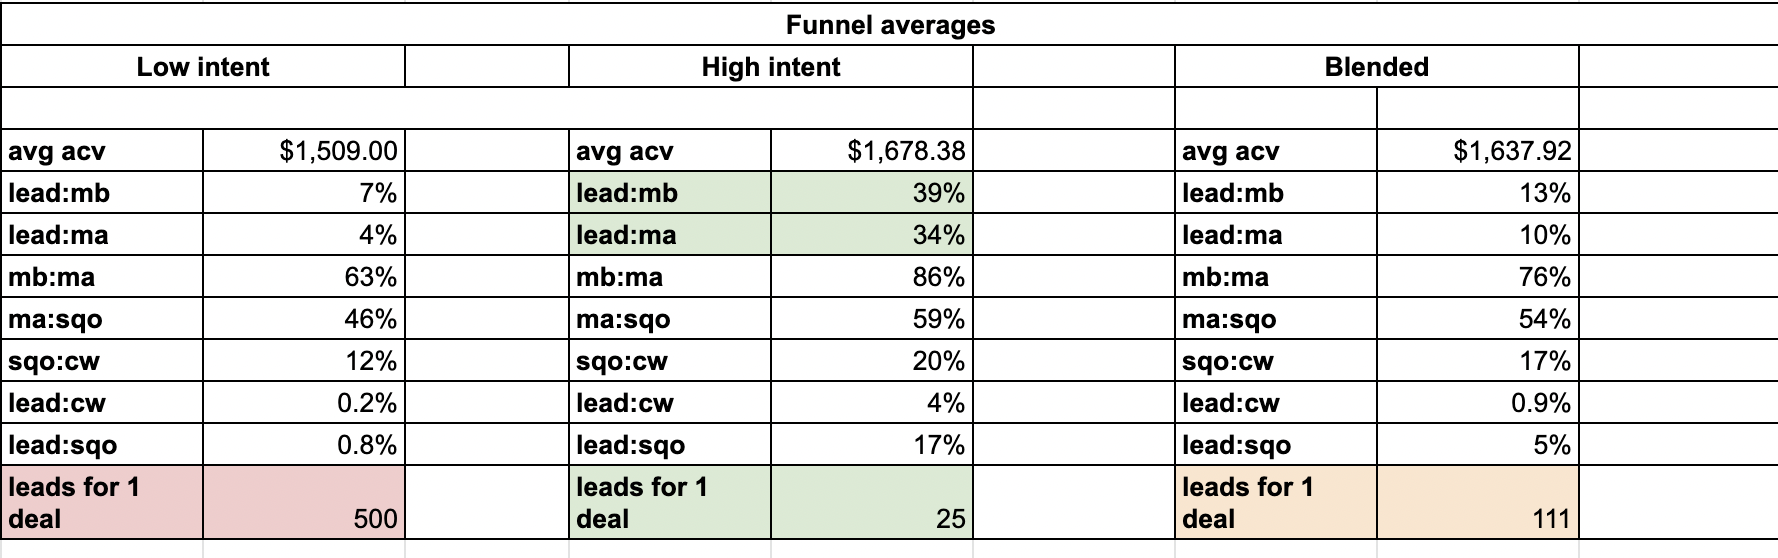 funnel averages table